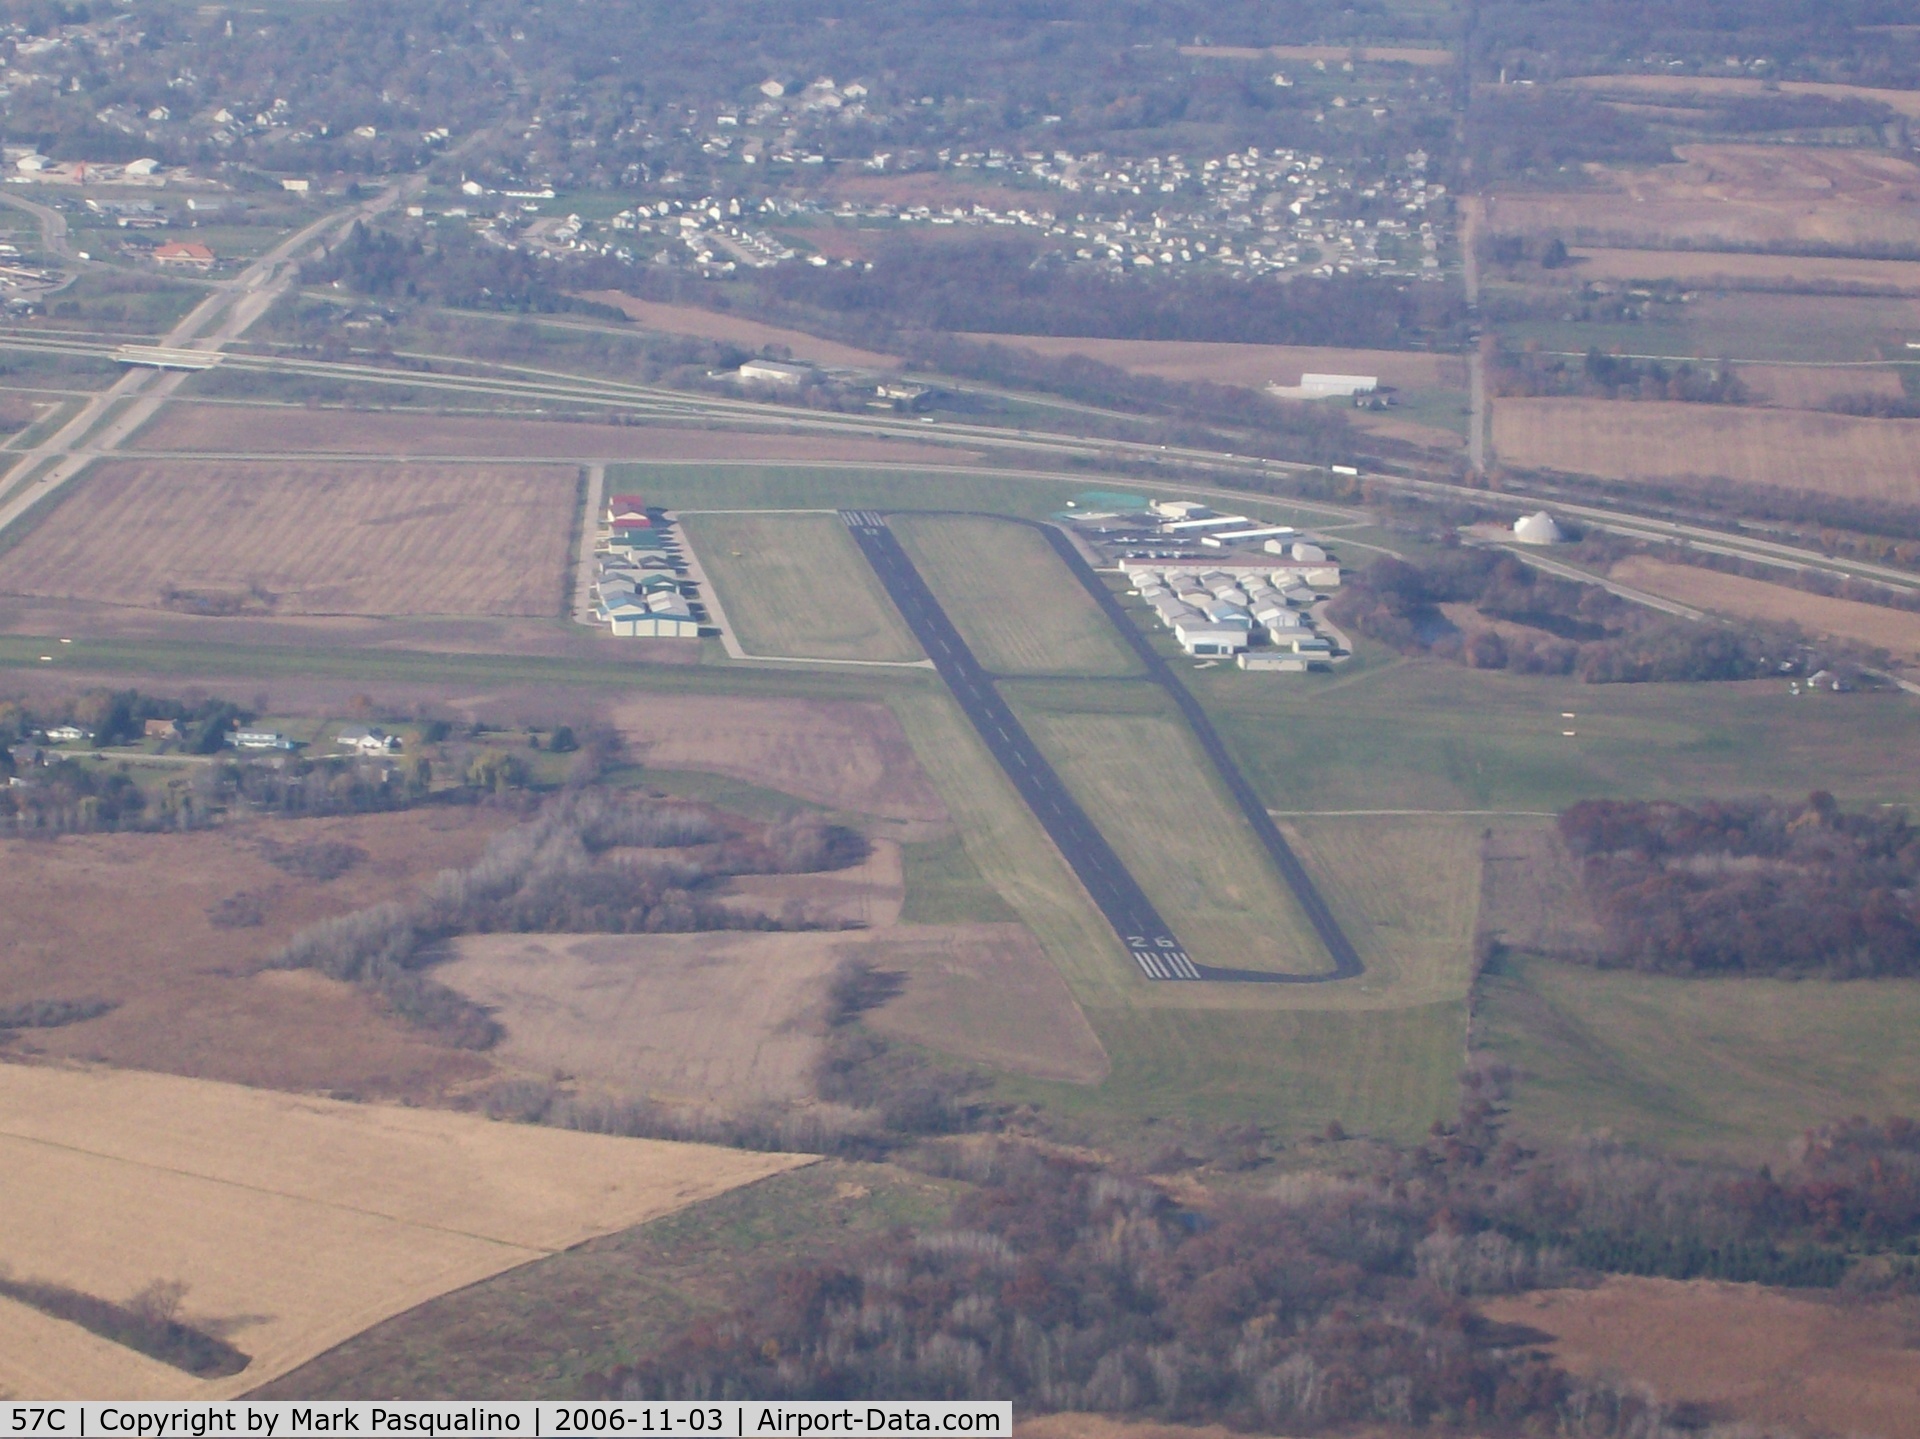 East Troy Municipal Airport (57C) - East Troy, WI